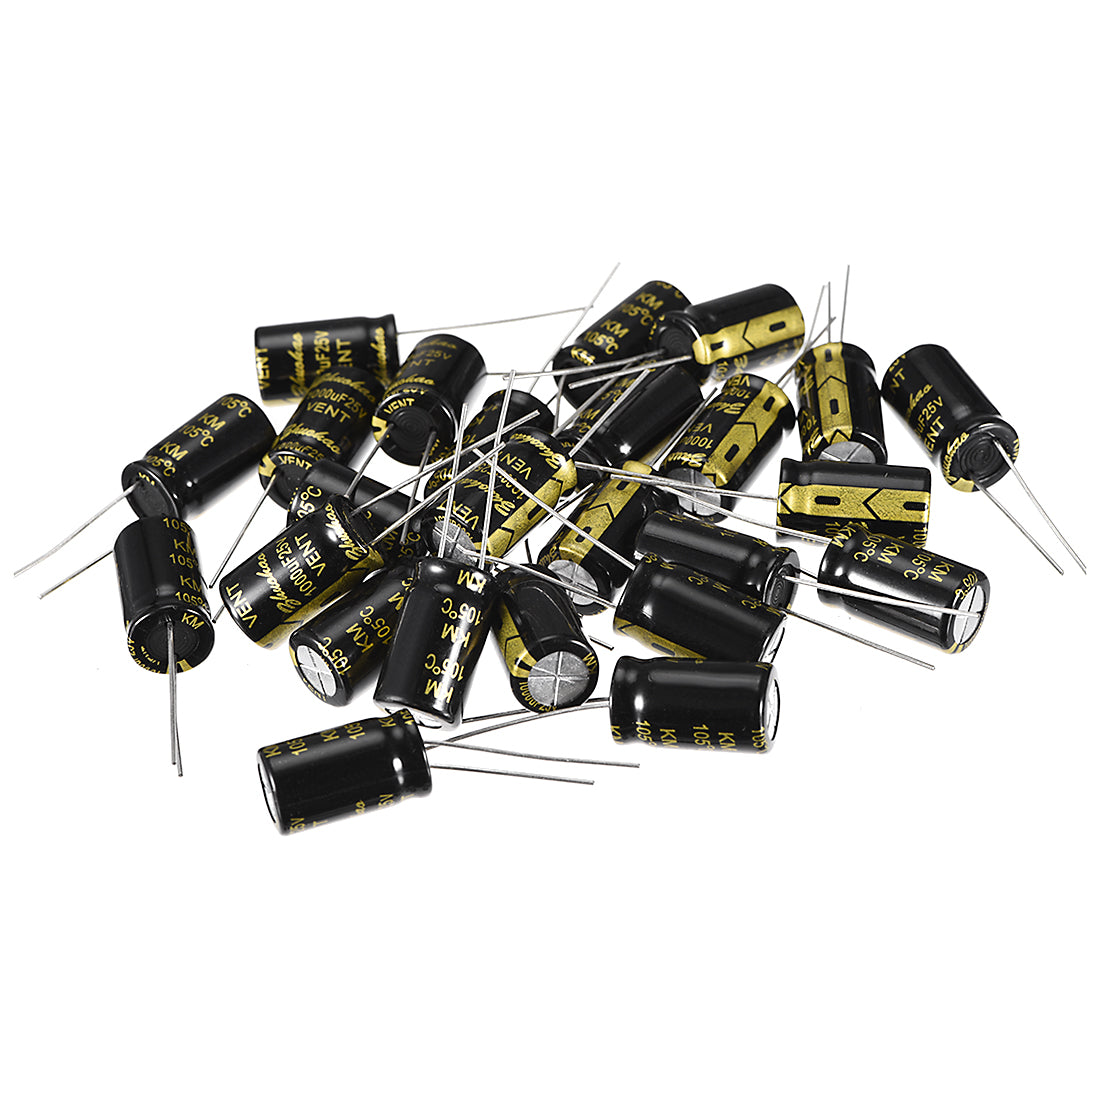 uxcell Uxcell Aluminum Radial Electrolytic Capacitor with 1000uF 25V 105 Celsius Life 2000H 10 x 17 mm Black 25pcs